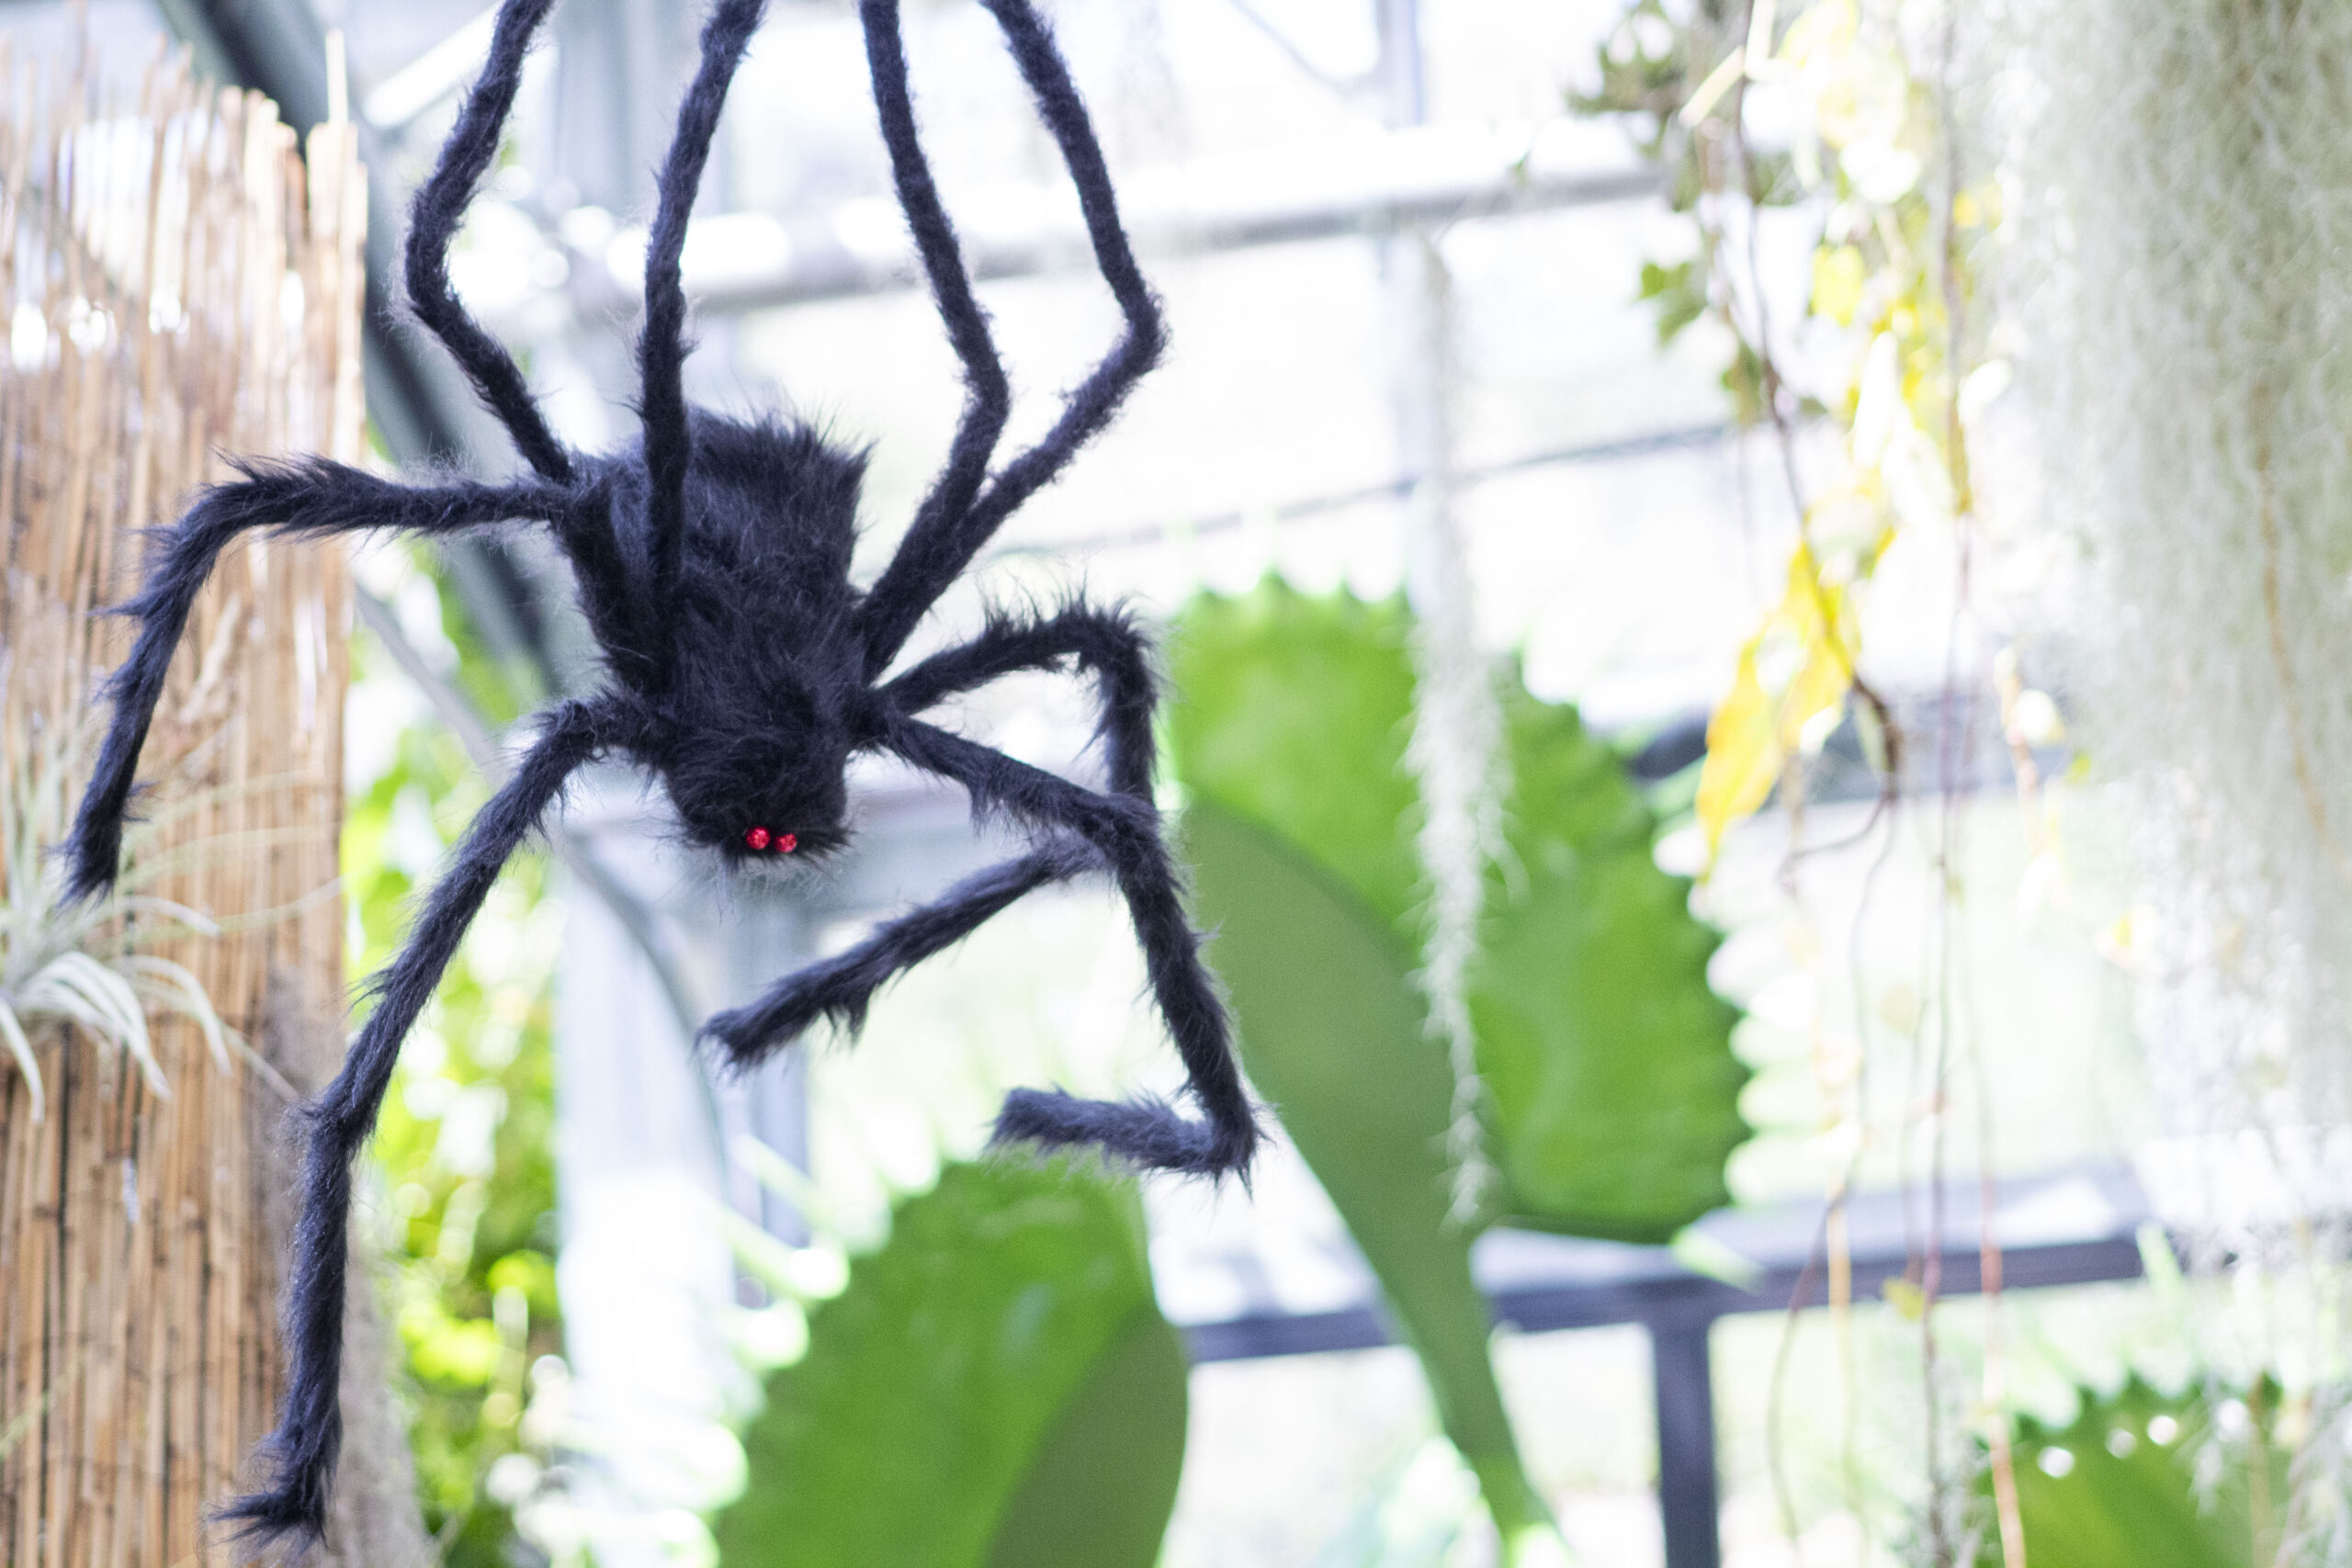 Giant stuffed spider hanging from conservatory